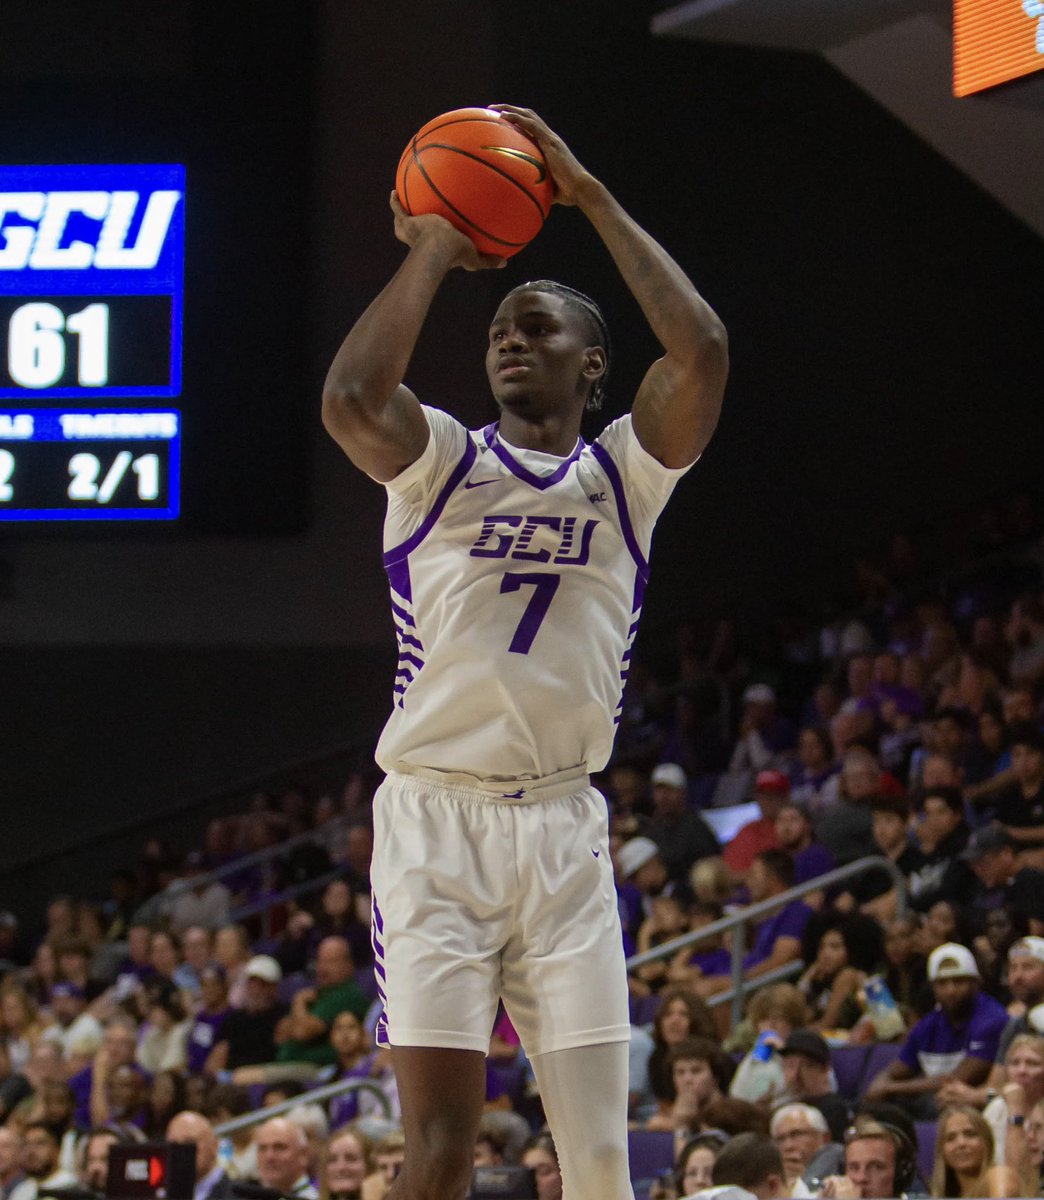 Amazing: Grand Canyon’s Tyon Grant-Foster – who had multiple heart surgeries and has been cleared by Mayo Clinic docs as he lives with a cardiac defibrillator – is entering the 2024 NBA Draft. Grant-Foster was WAC Player of the Year and led GCU to its first ever NCAA tourney win.